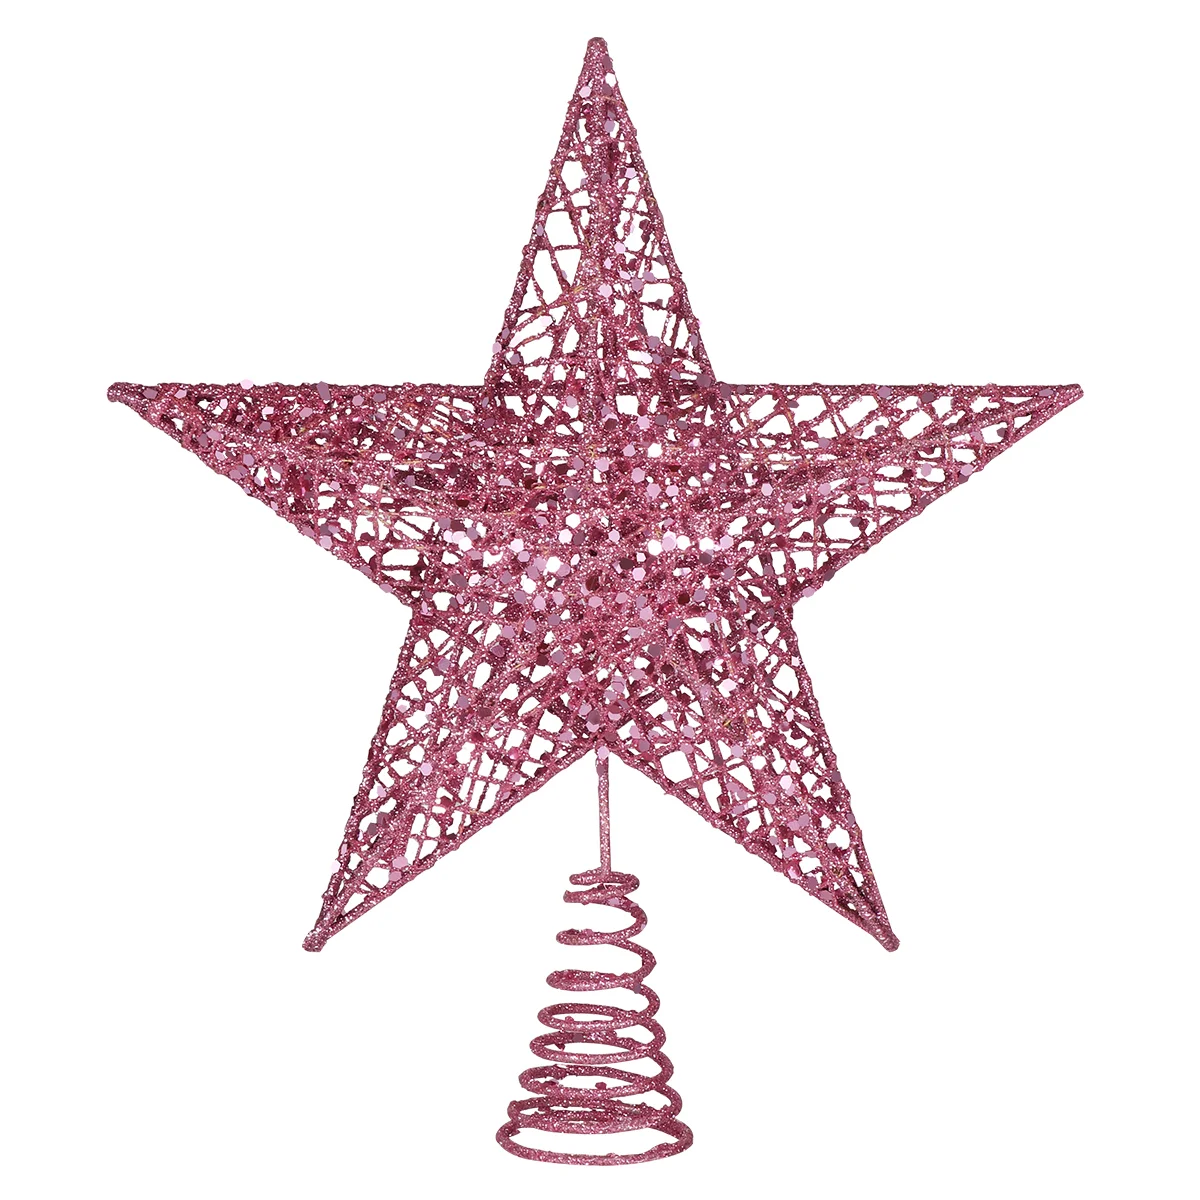 

Amosfun 25cm Christmas Tree Star Topper Glittering Christmas Tree Pendant Ornaments Christmas Decorations for Home New Year